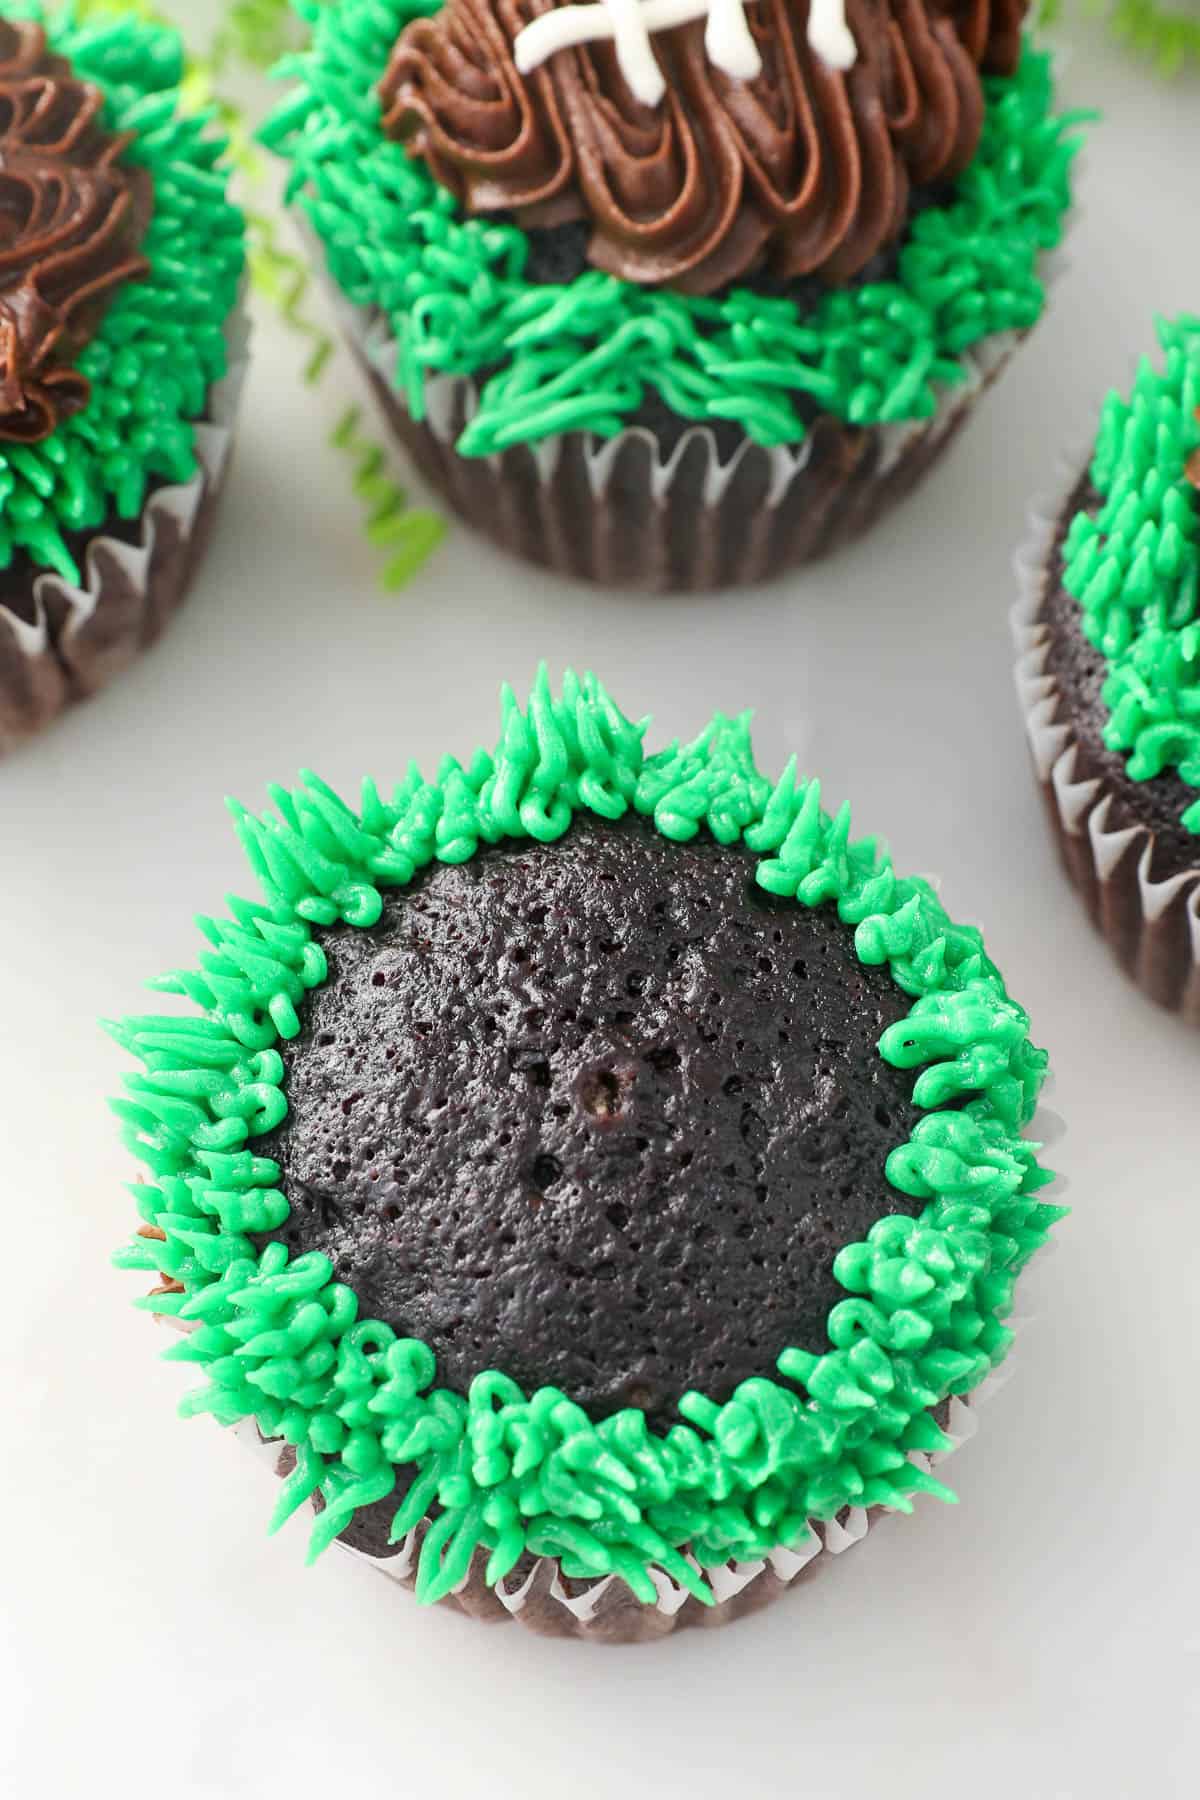 Close up of a chocolate cupcake with green frosting grass piped around the edges.